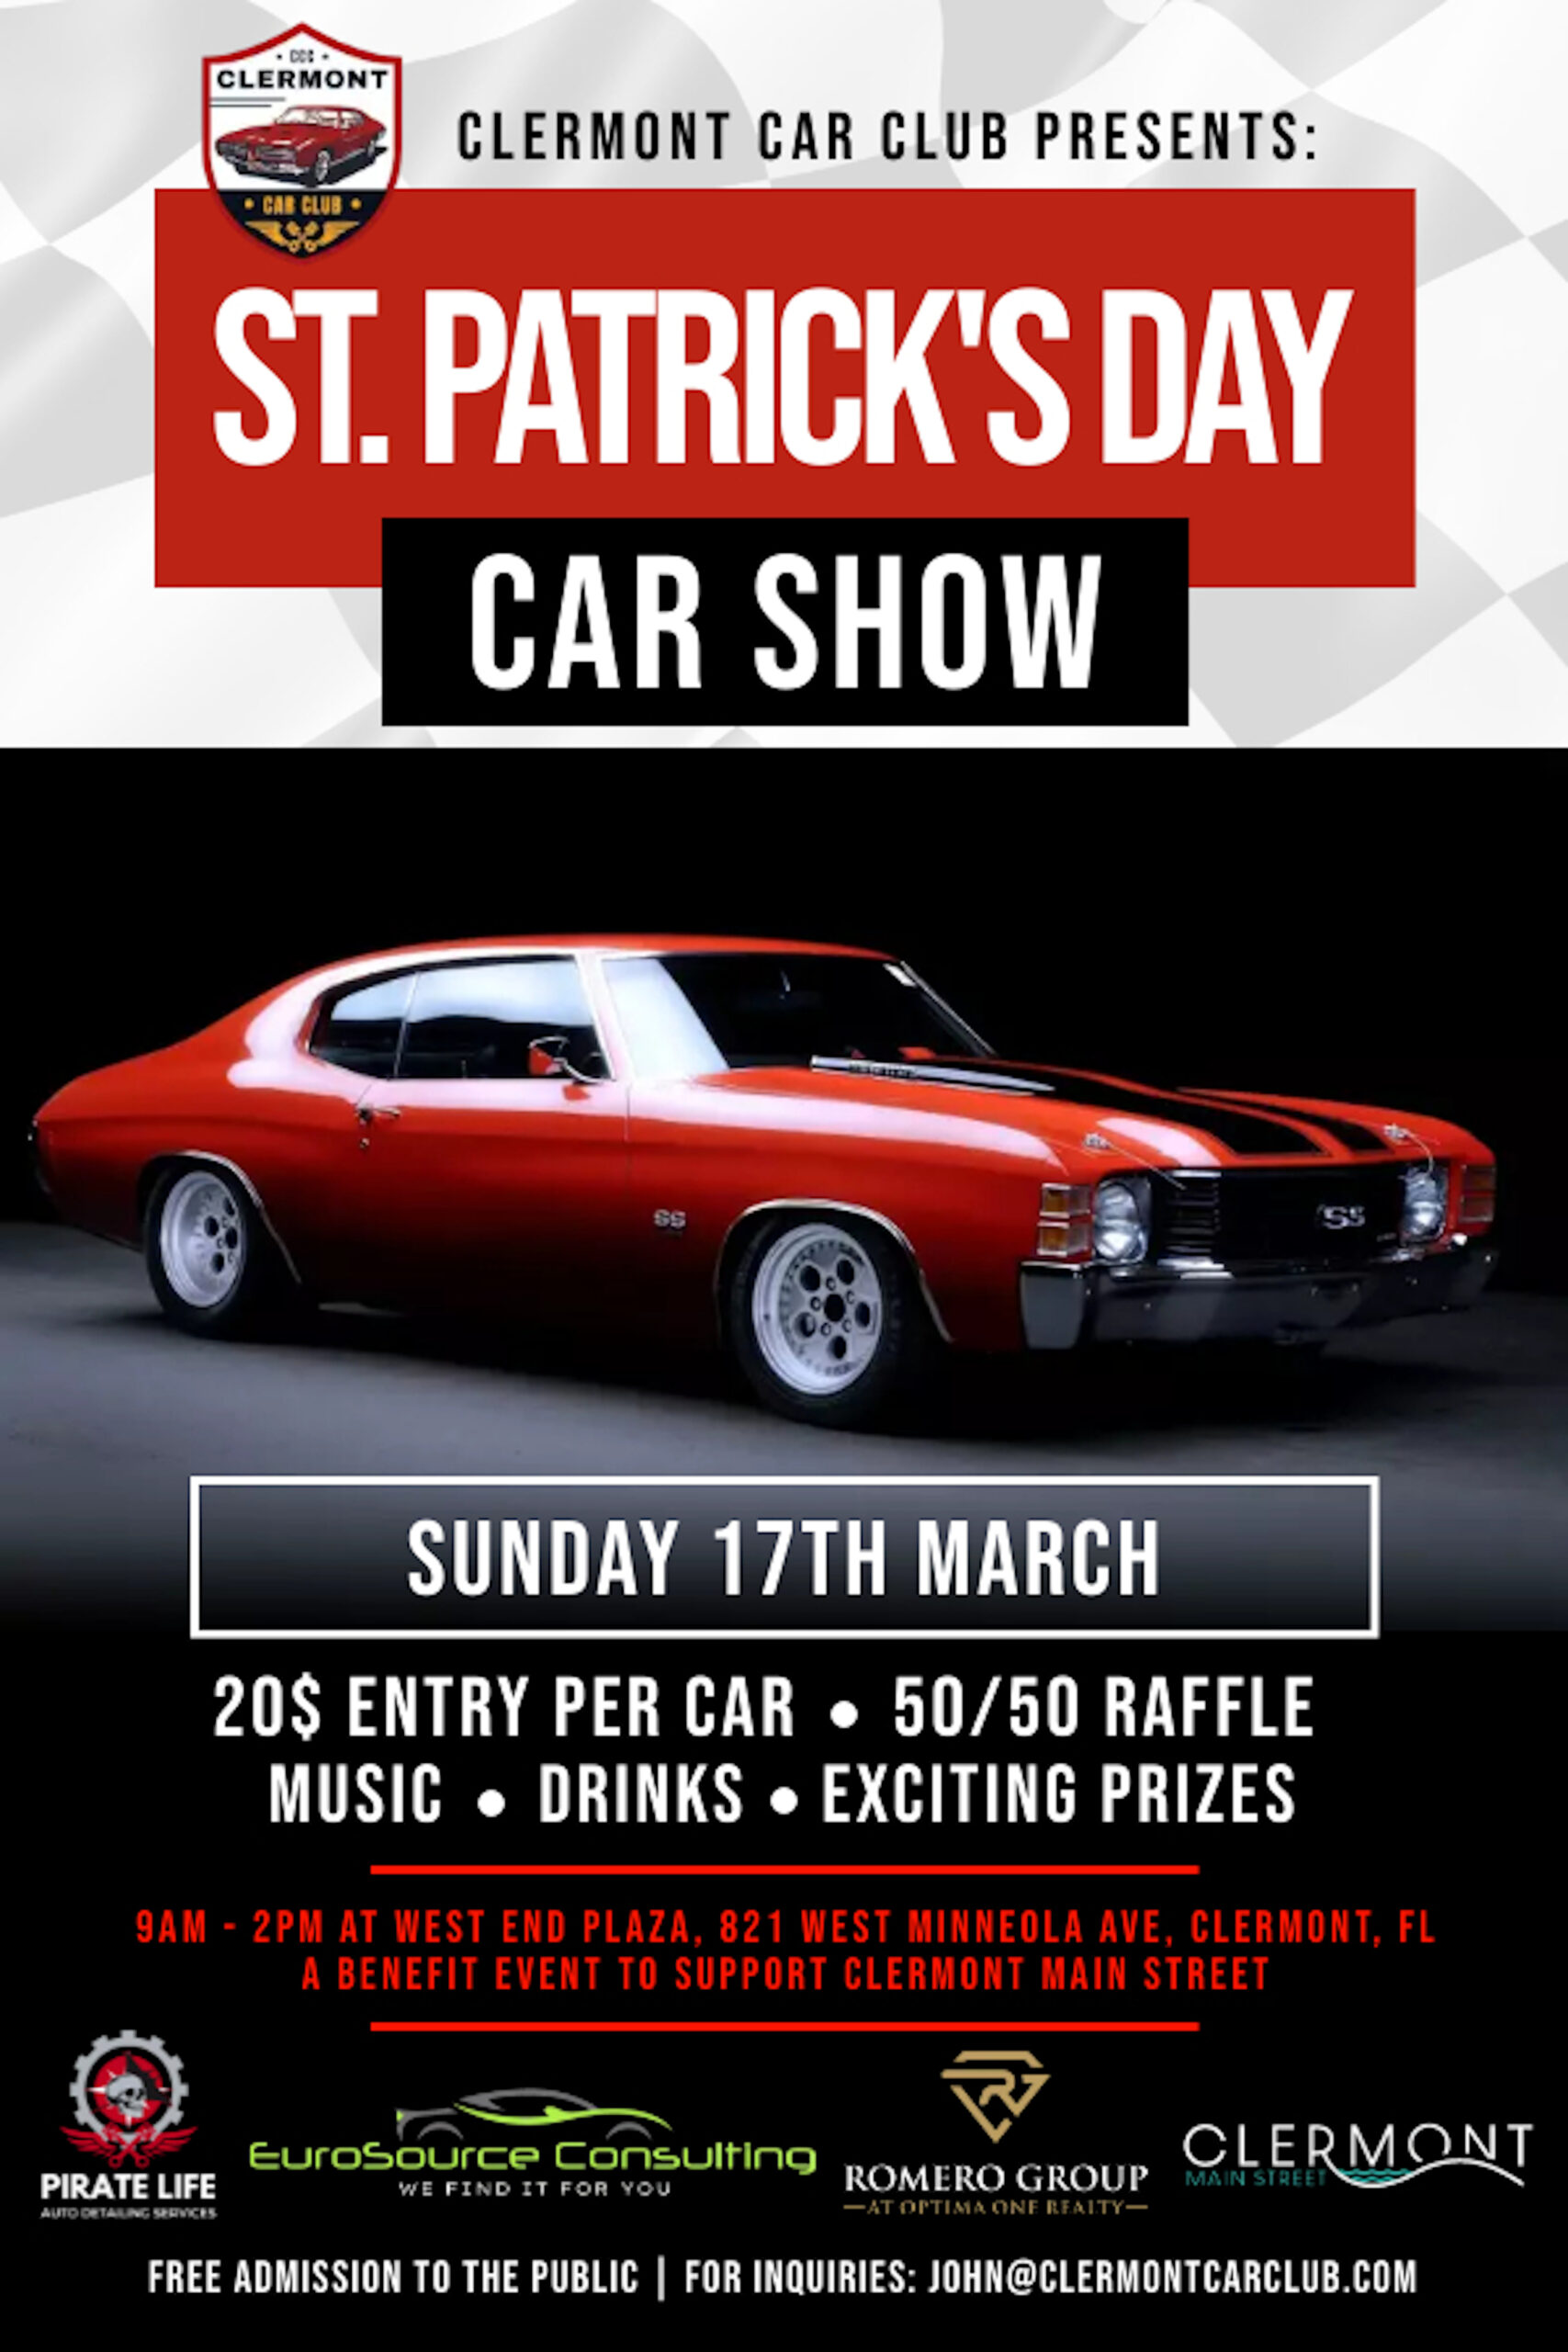 St. Patrick's Day Car Show